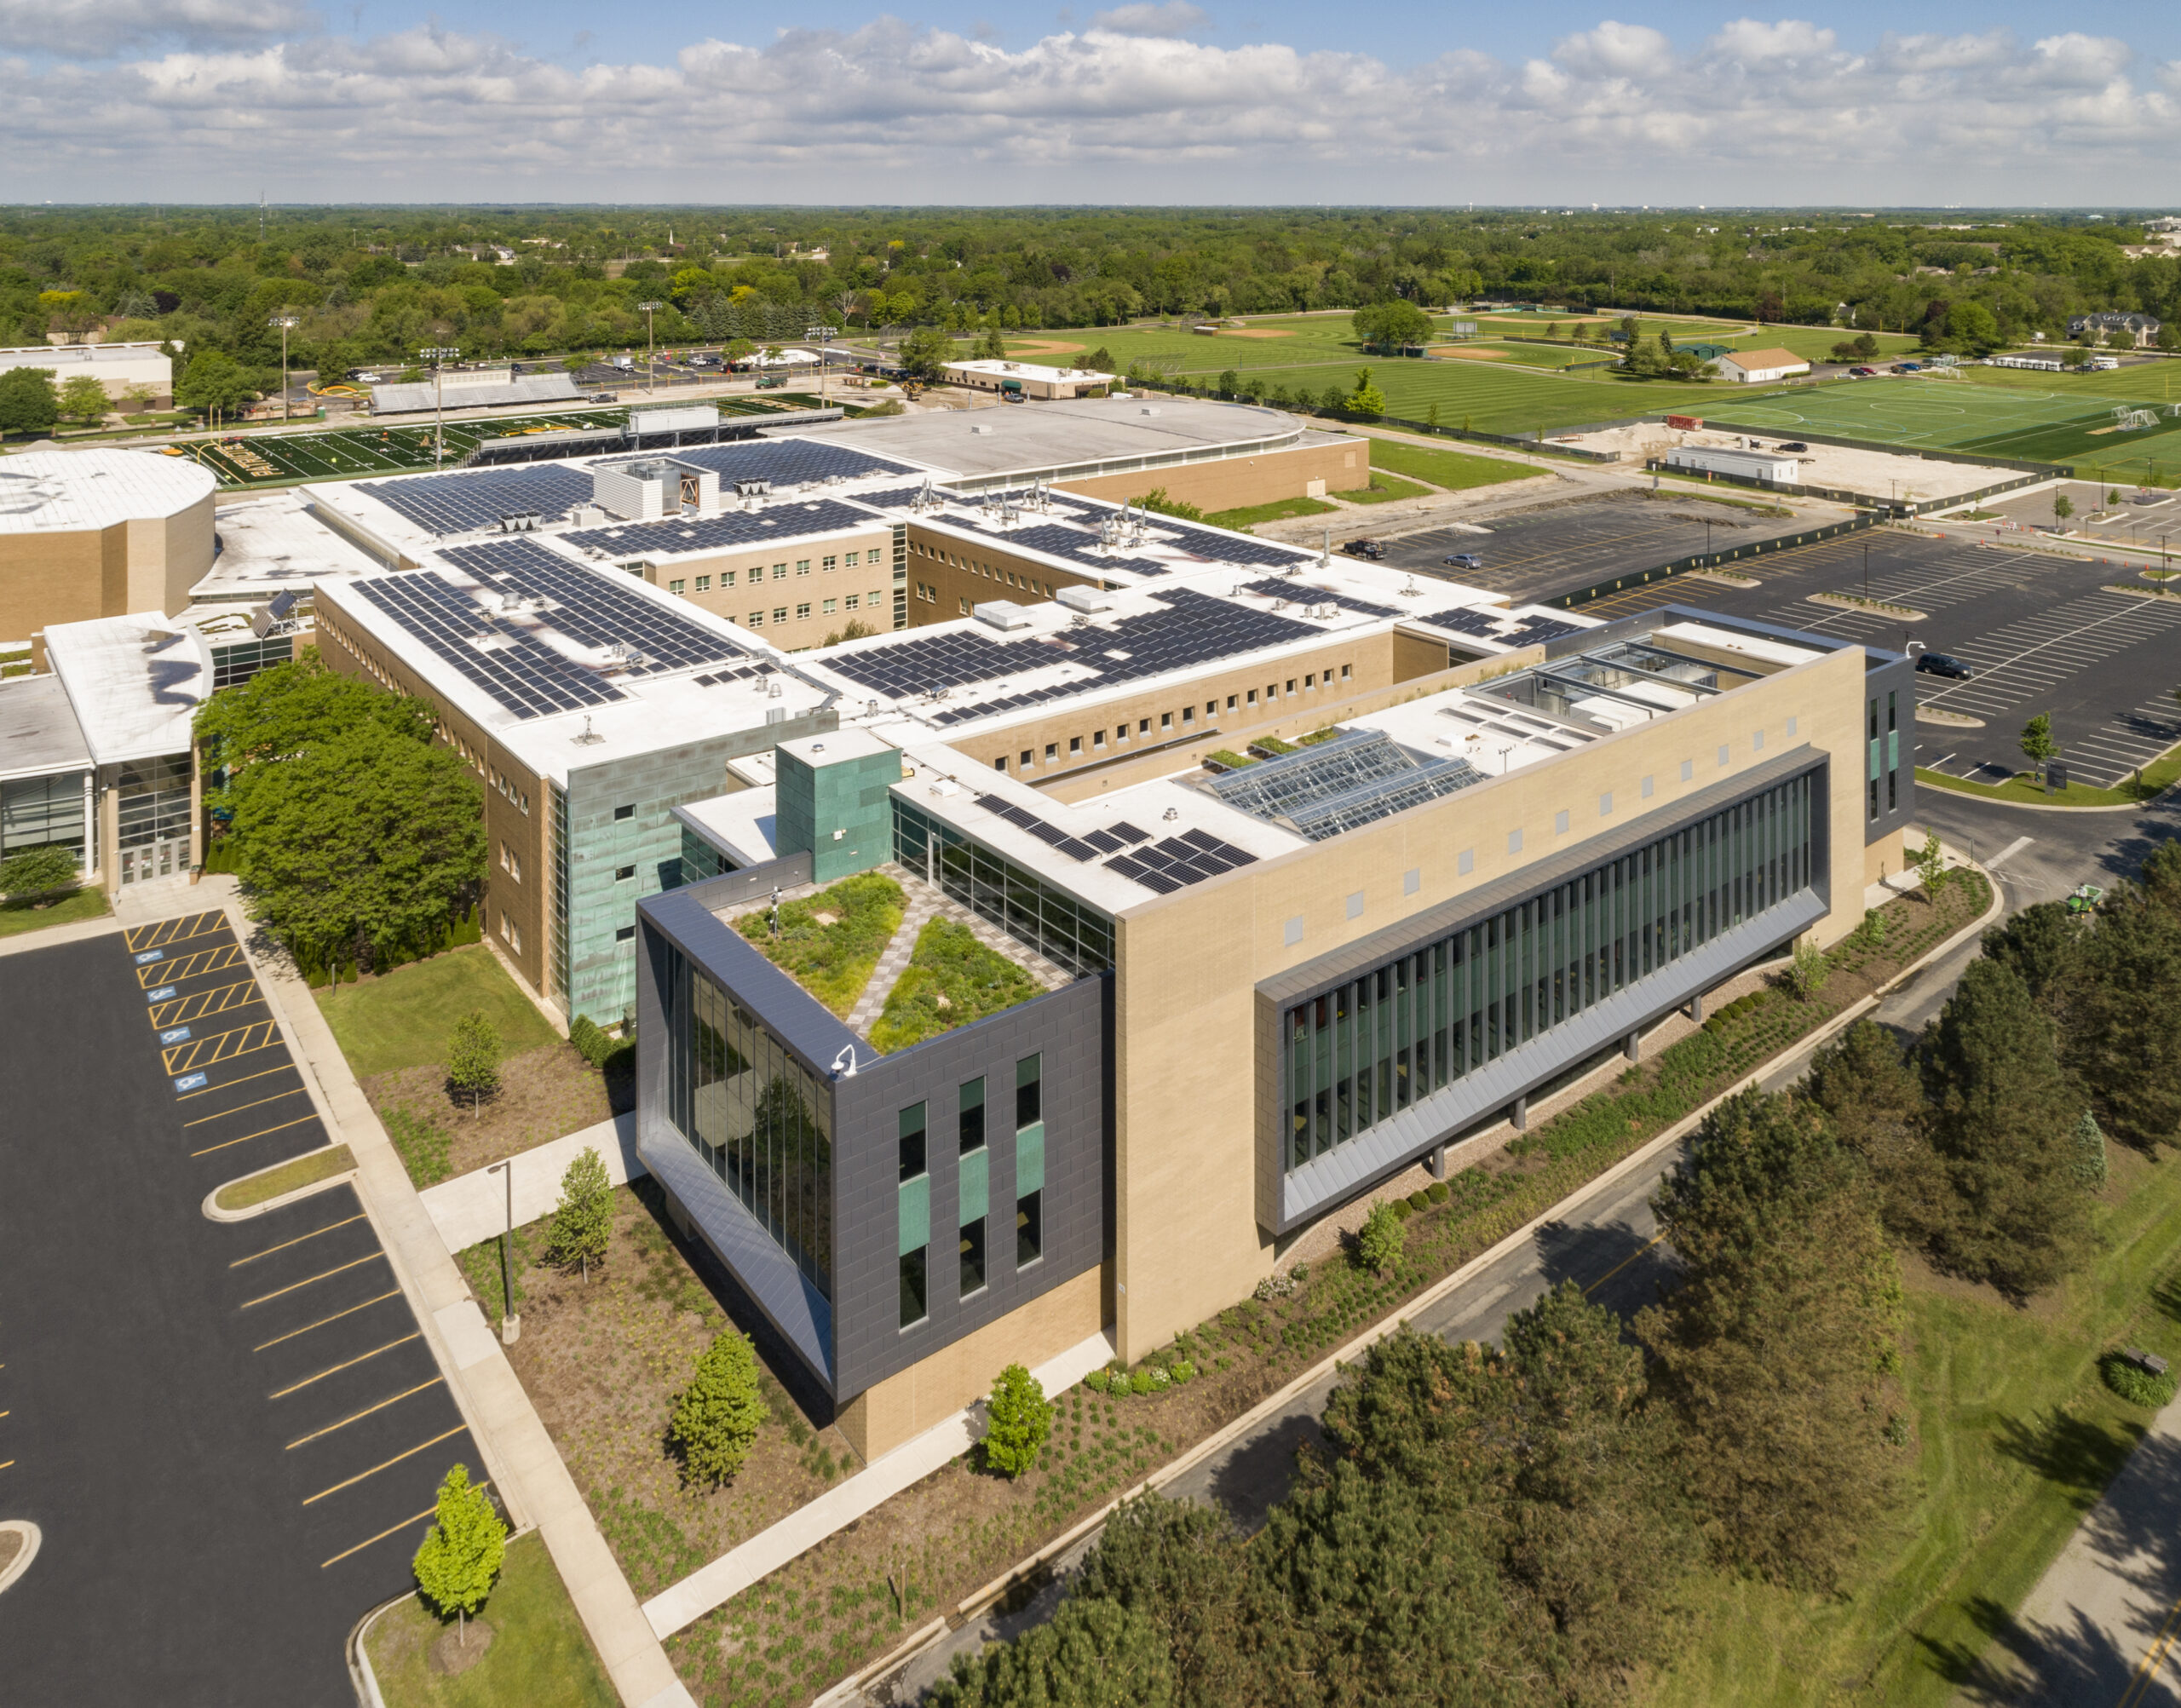 A $1 million ICECF grant funded the Adlai E. Stevenson High School Science
Addition's rooftop solar array which helped the project to reach Zero Energy Certification.
from the International Living Future Institute (ILFI), Illinois' first building to do so. (Photo credit to Connor Steinkamp.)